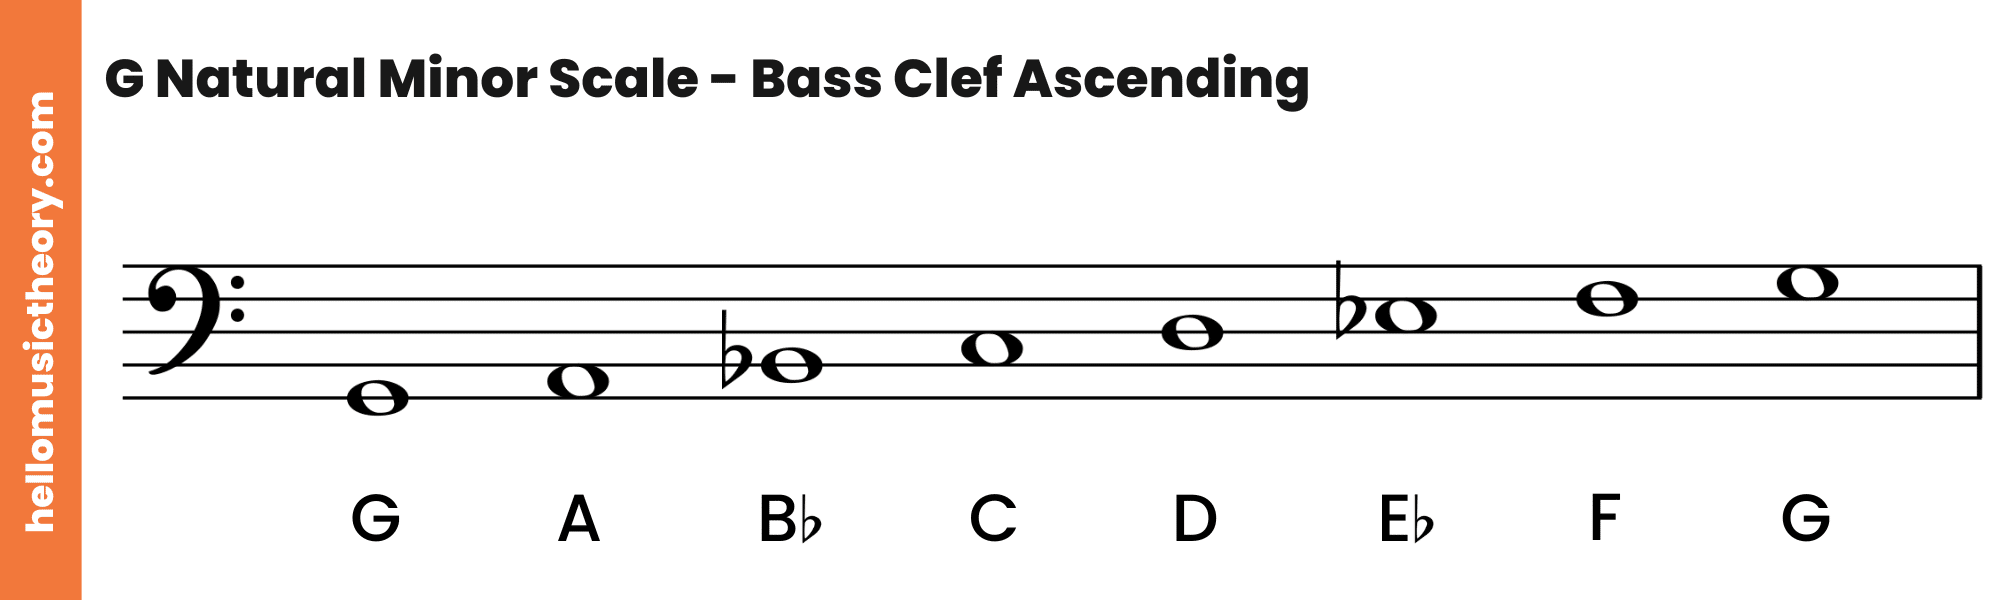 G Natural Minor Scale Bass Clef Ascending